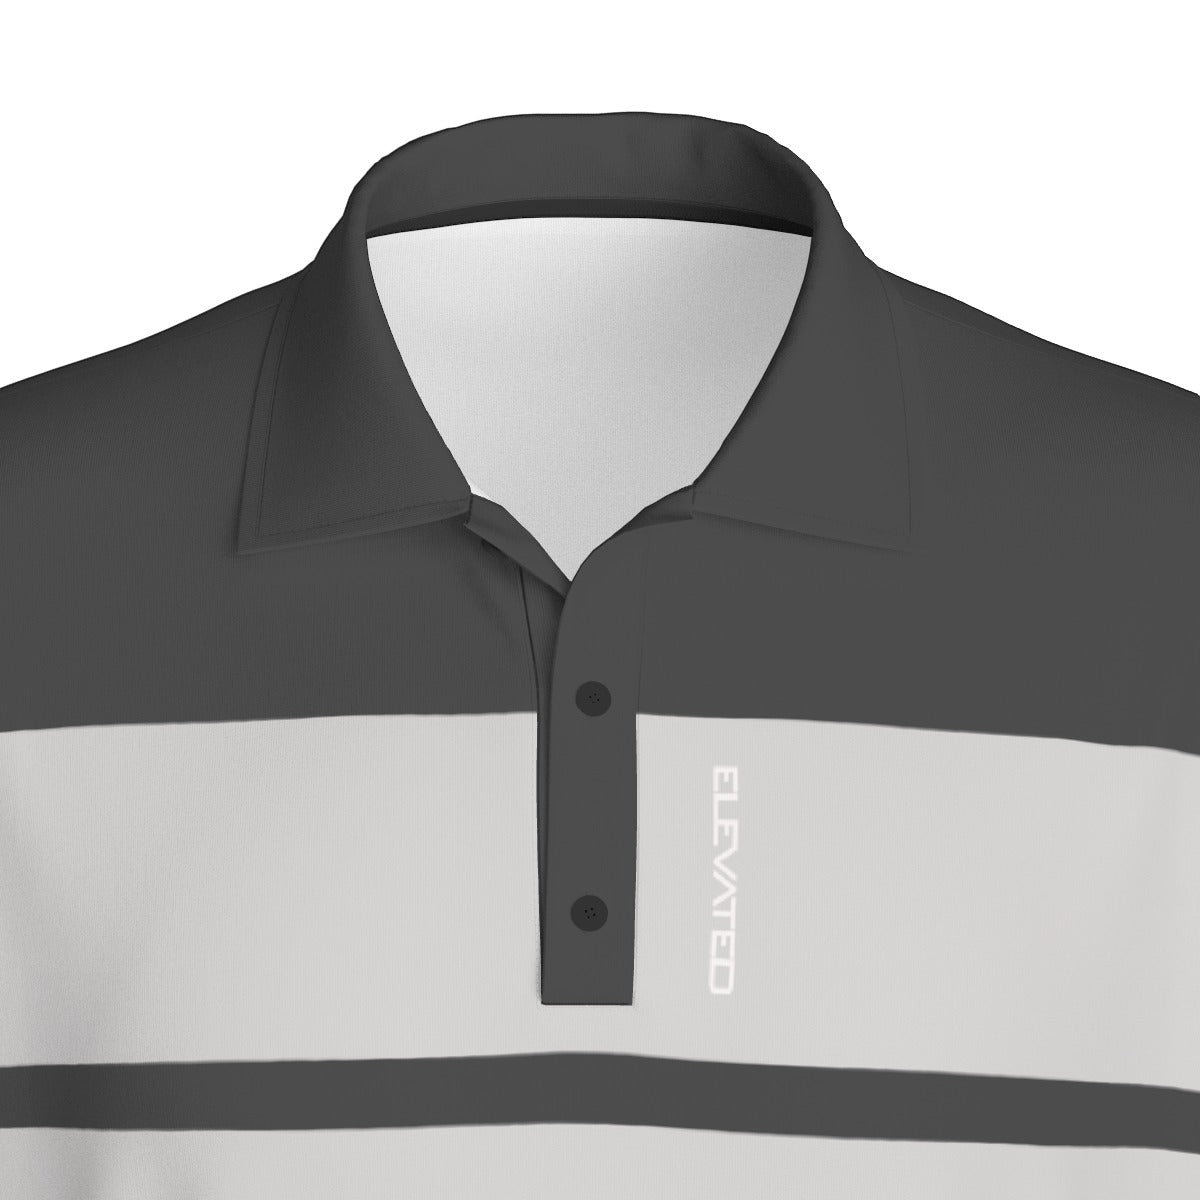 Elevated Grey Strip Breathable golf polo